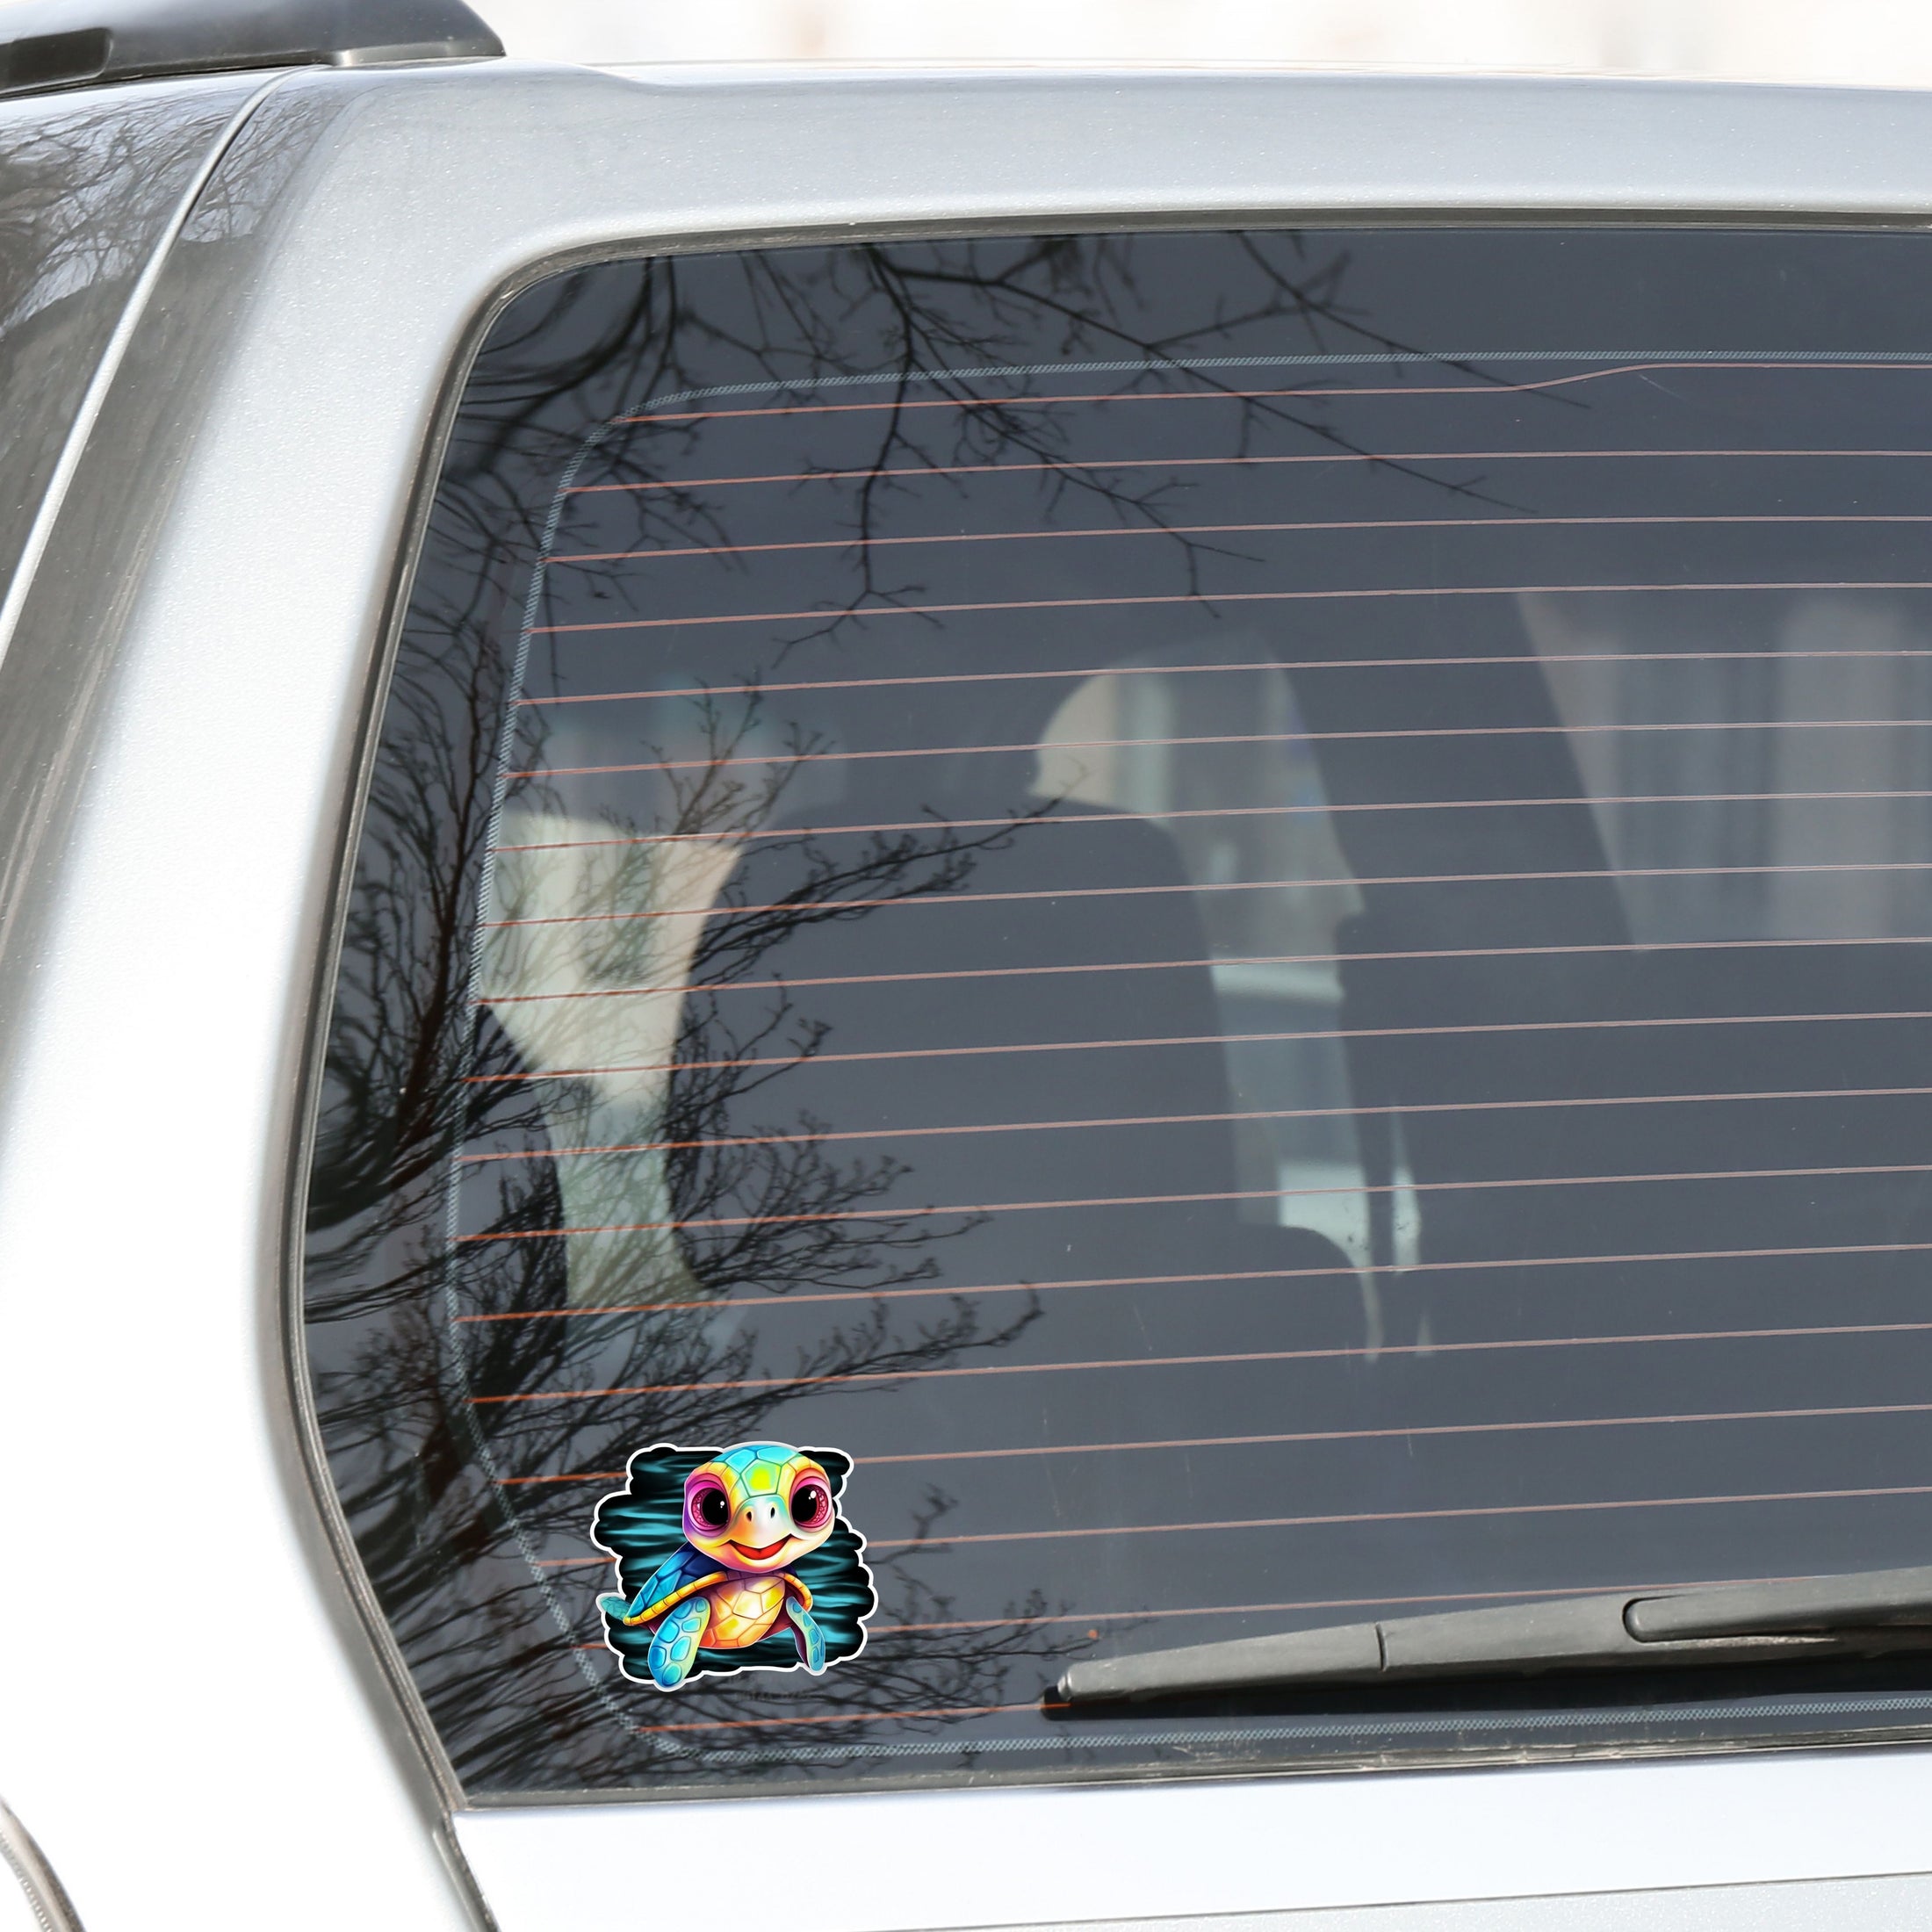 This image shows the baby sea turtle sticker on the back window of a car.